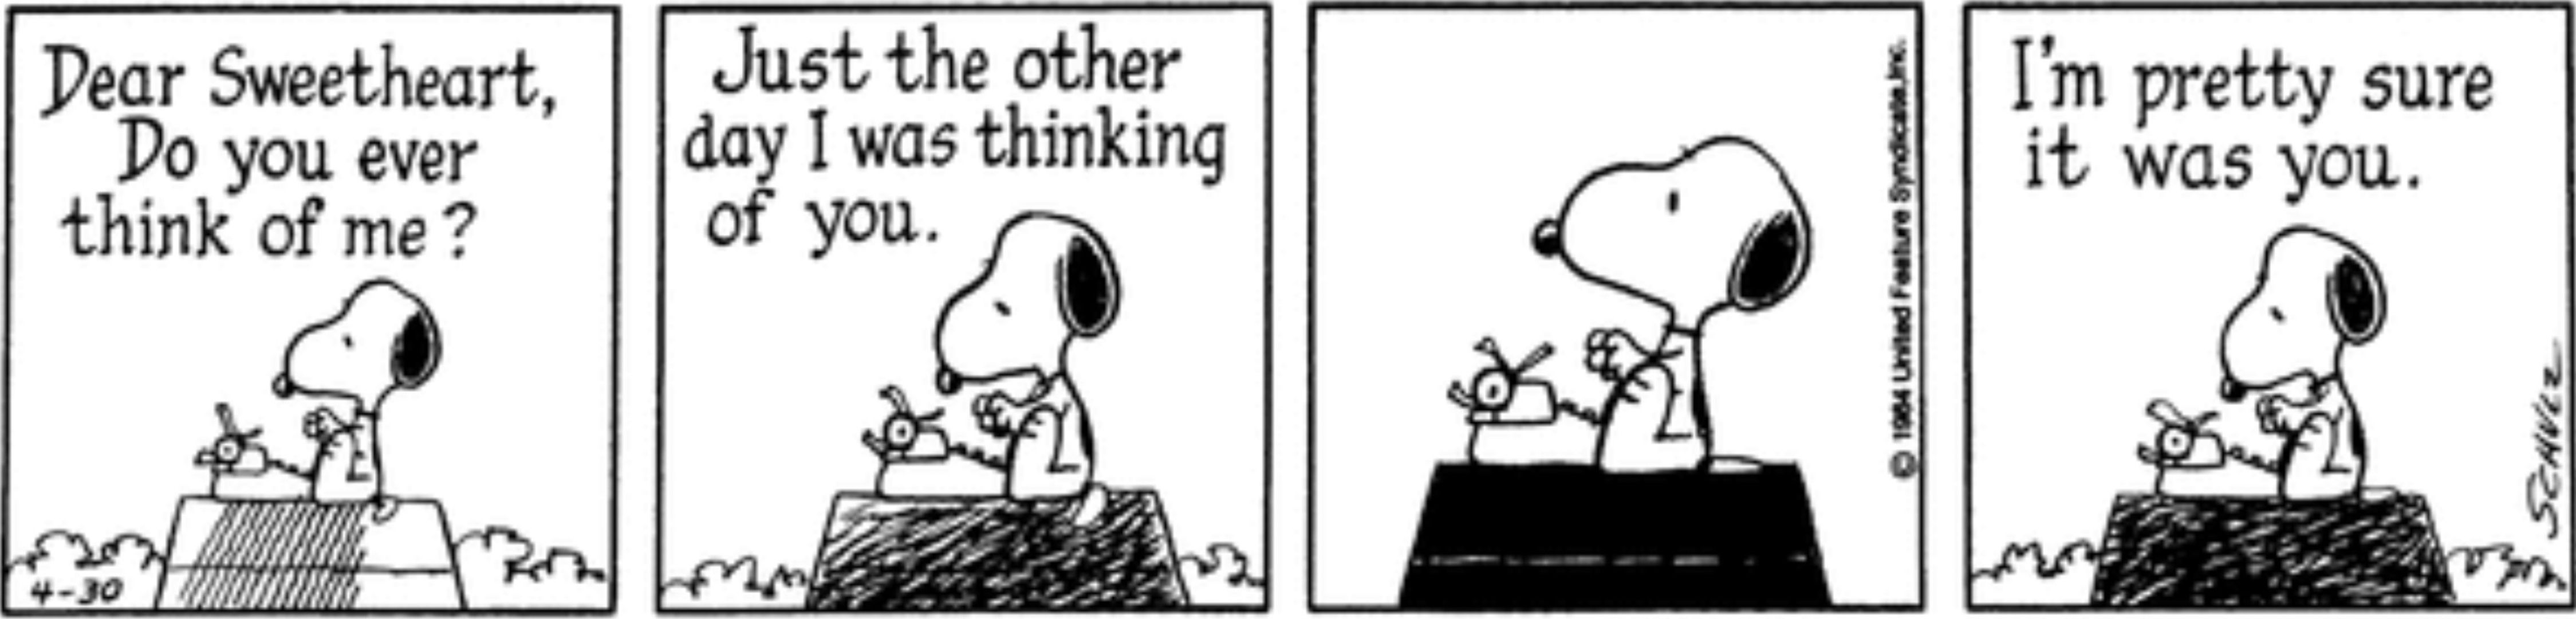 Snoopy writing on his typewriter in Peanuts.